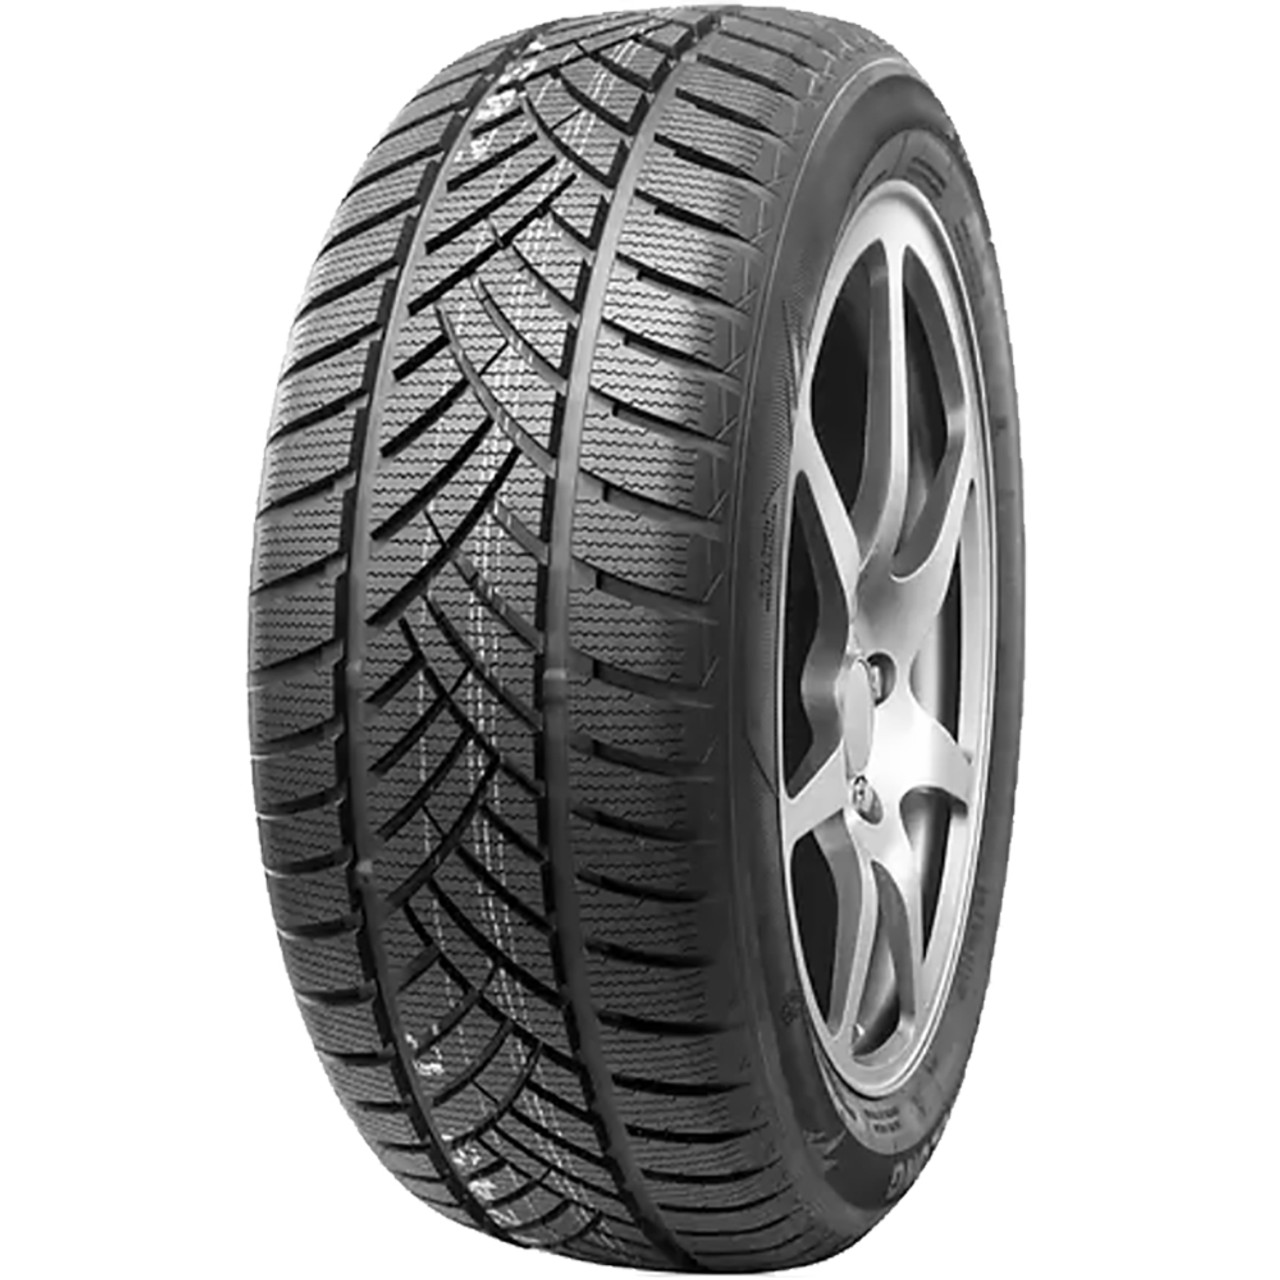 Thumb Leao Gomme Nuove Leao 215/55 R16 97H WINT.DEFENDER HP M+S pneumatici nuovi Invernale 0